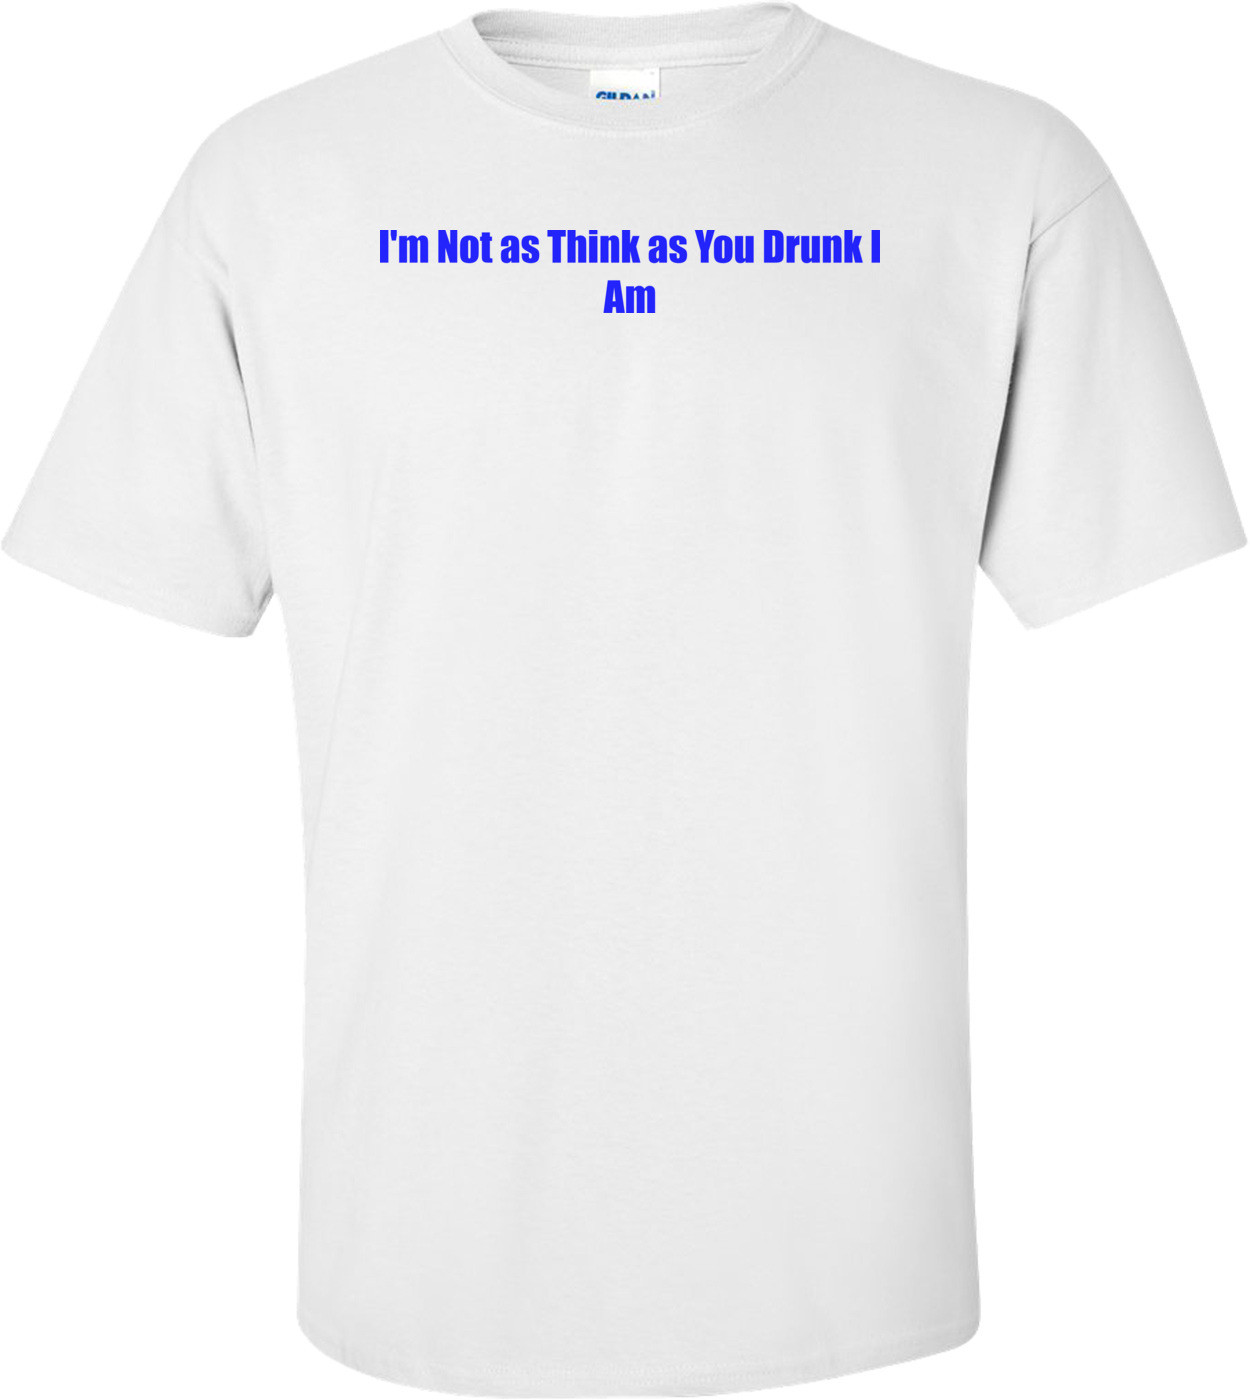 I'm Not As Think As You Drunk I Am Shirt